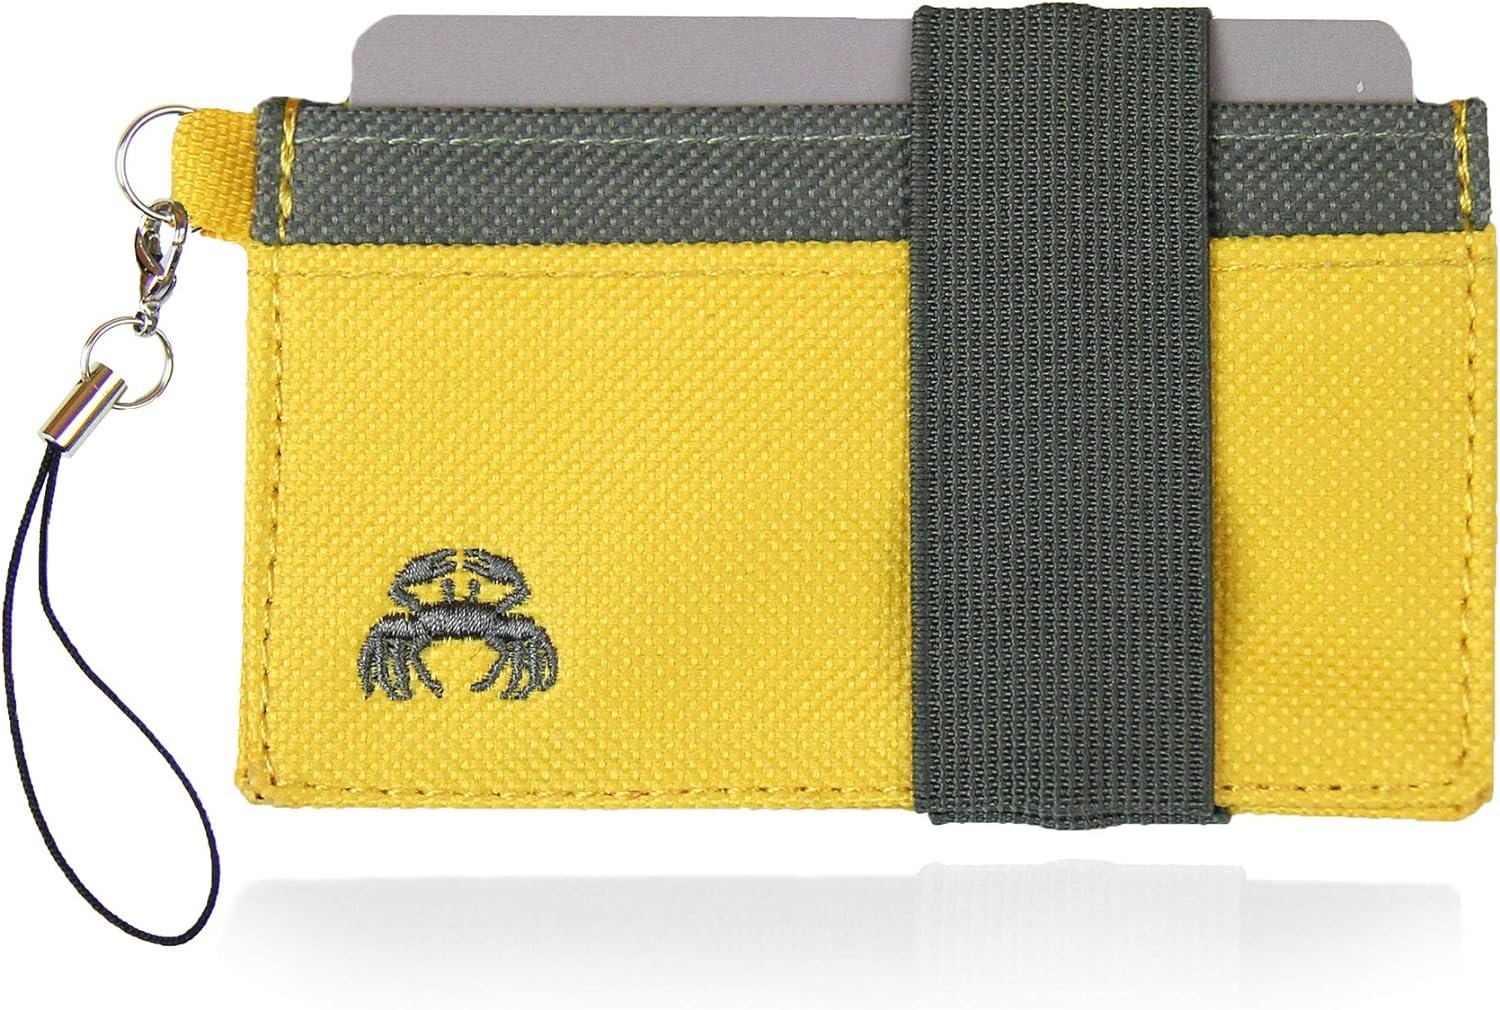 Crabby Wallet Review